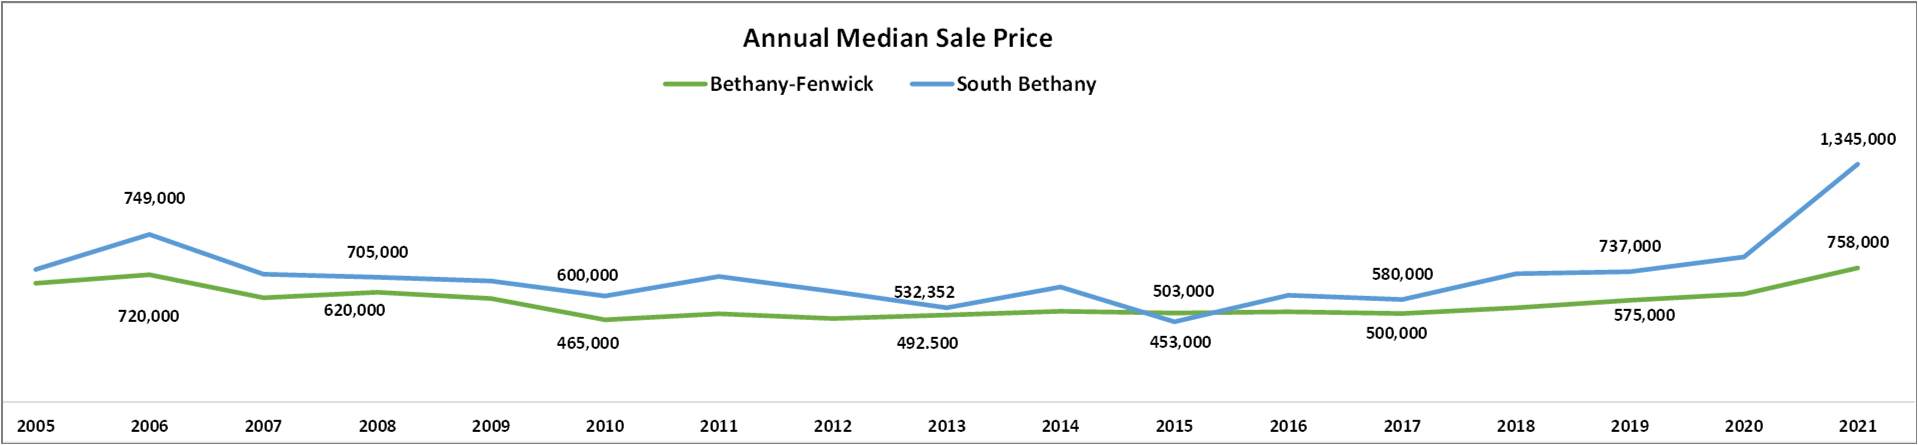 South Bethany median sale price